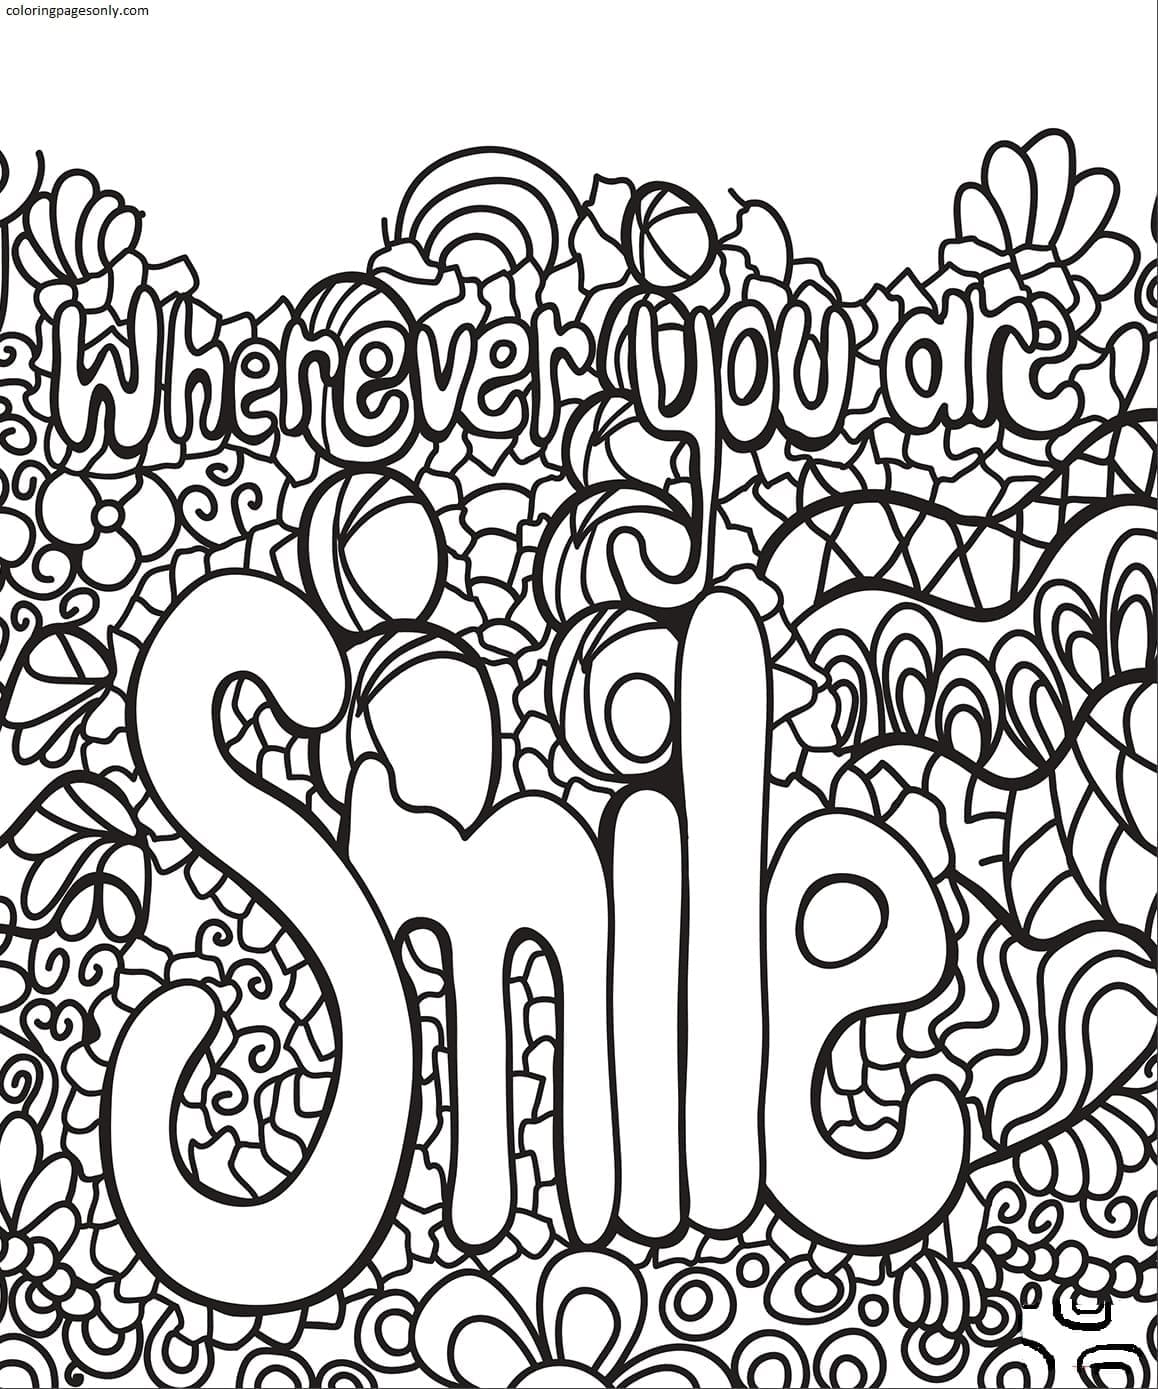 Wherever You are Smile Coloring Pages